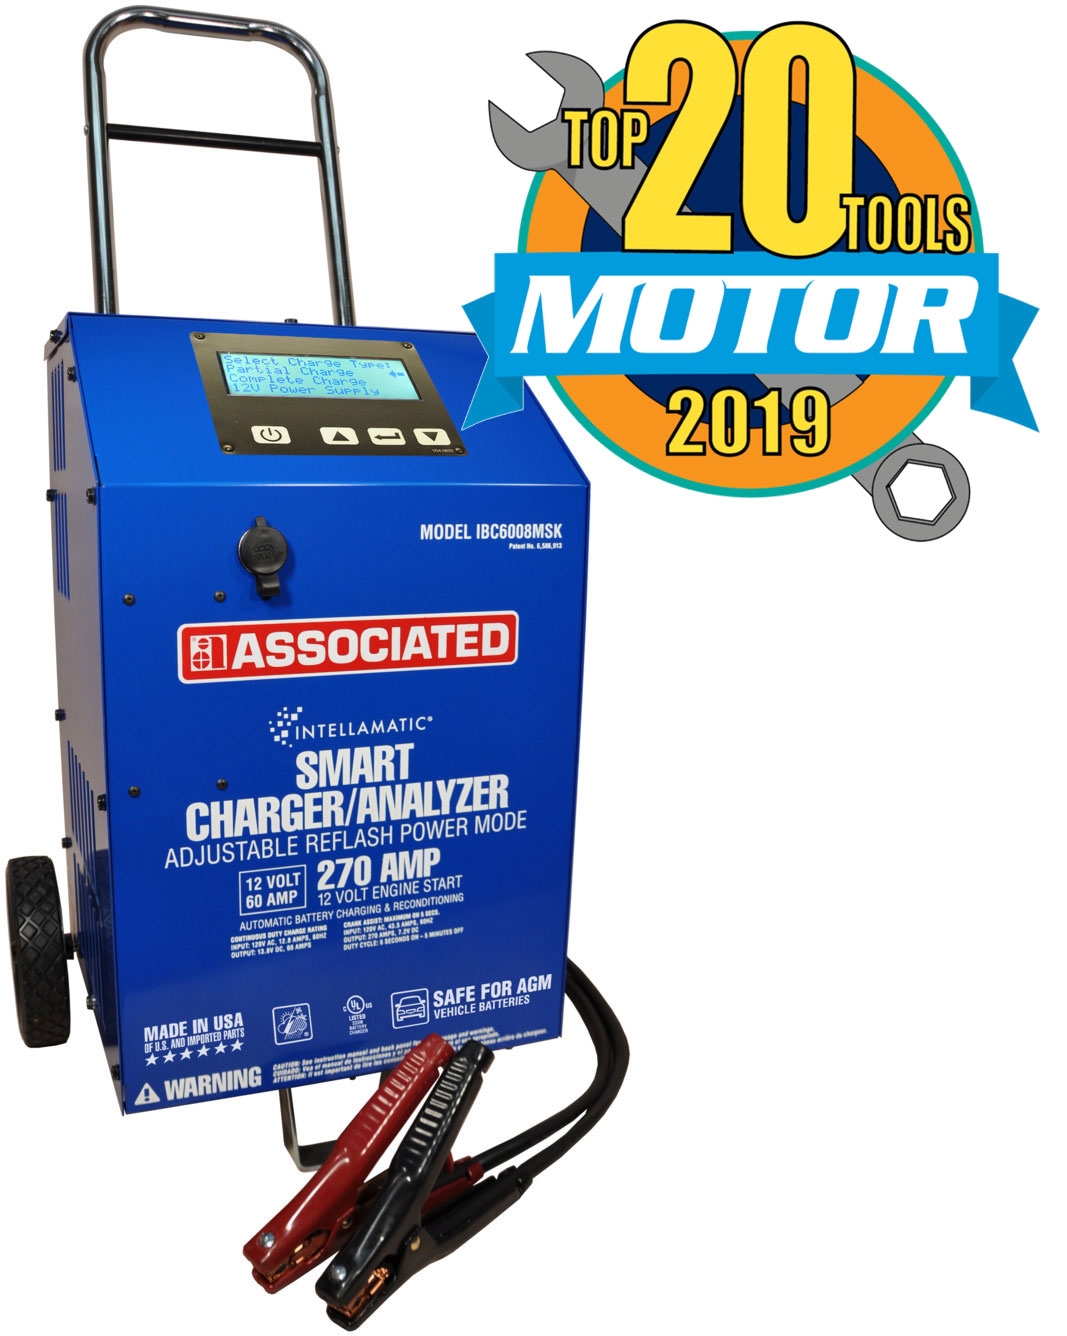 4745 CHARGE IT! 12/24 Volt Wheel Automotive Battery Charger; 40/20